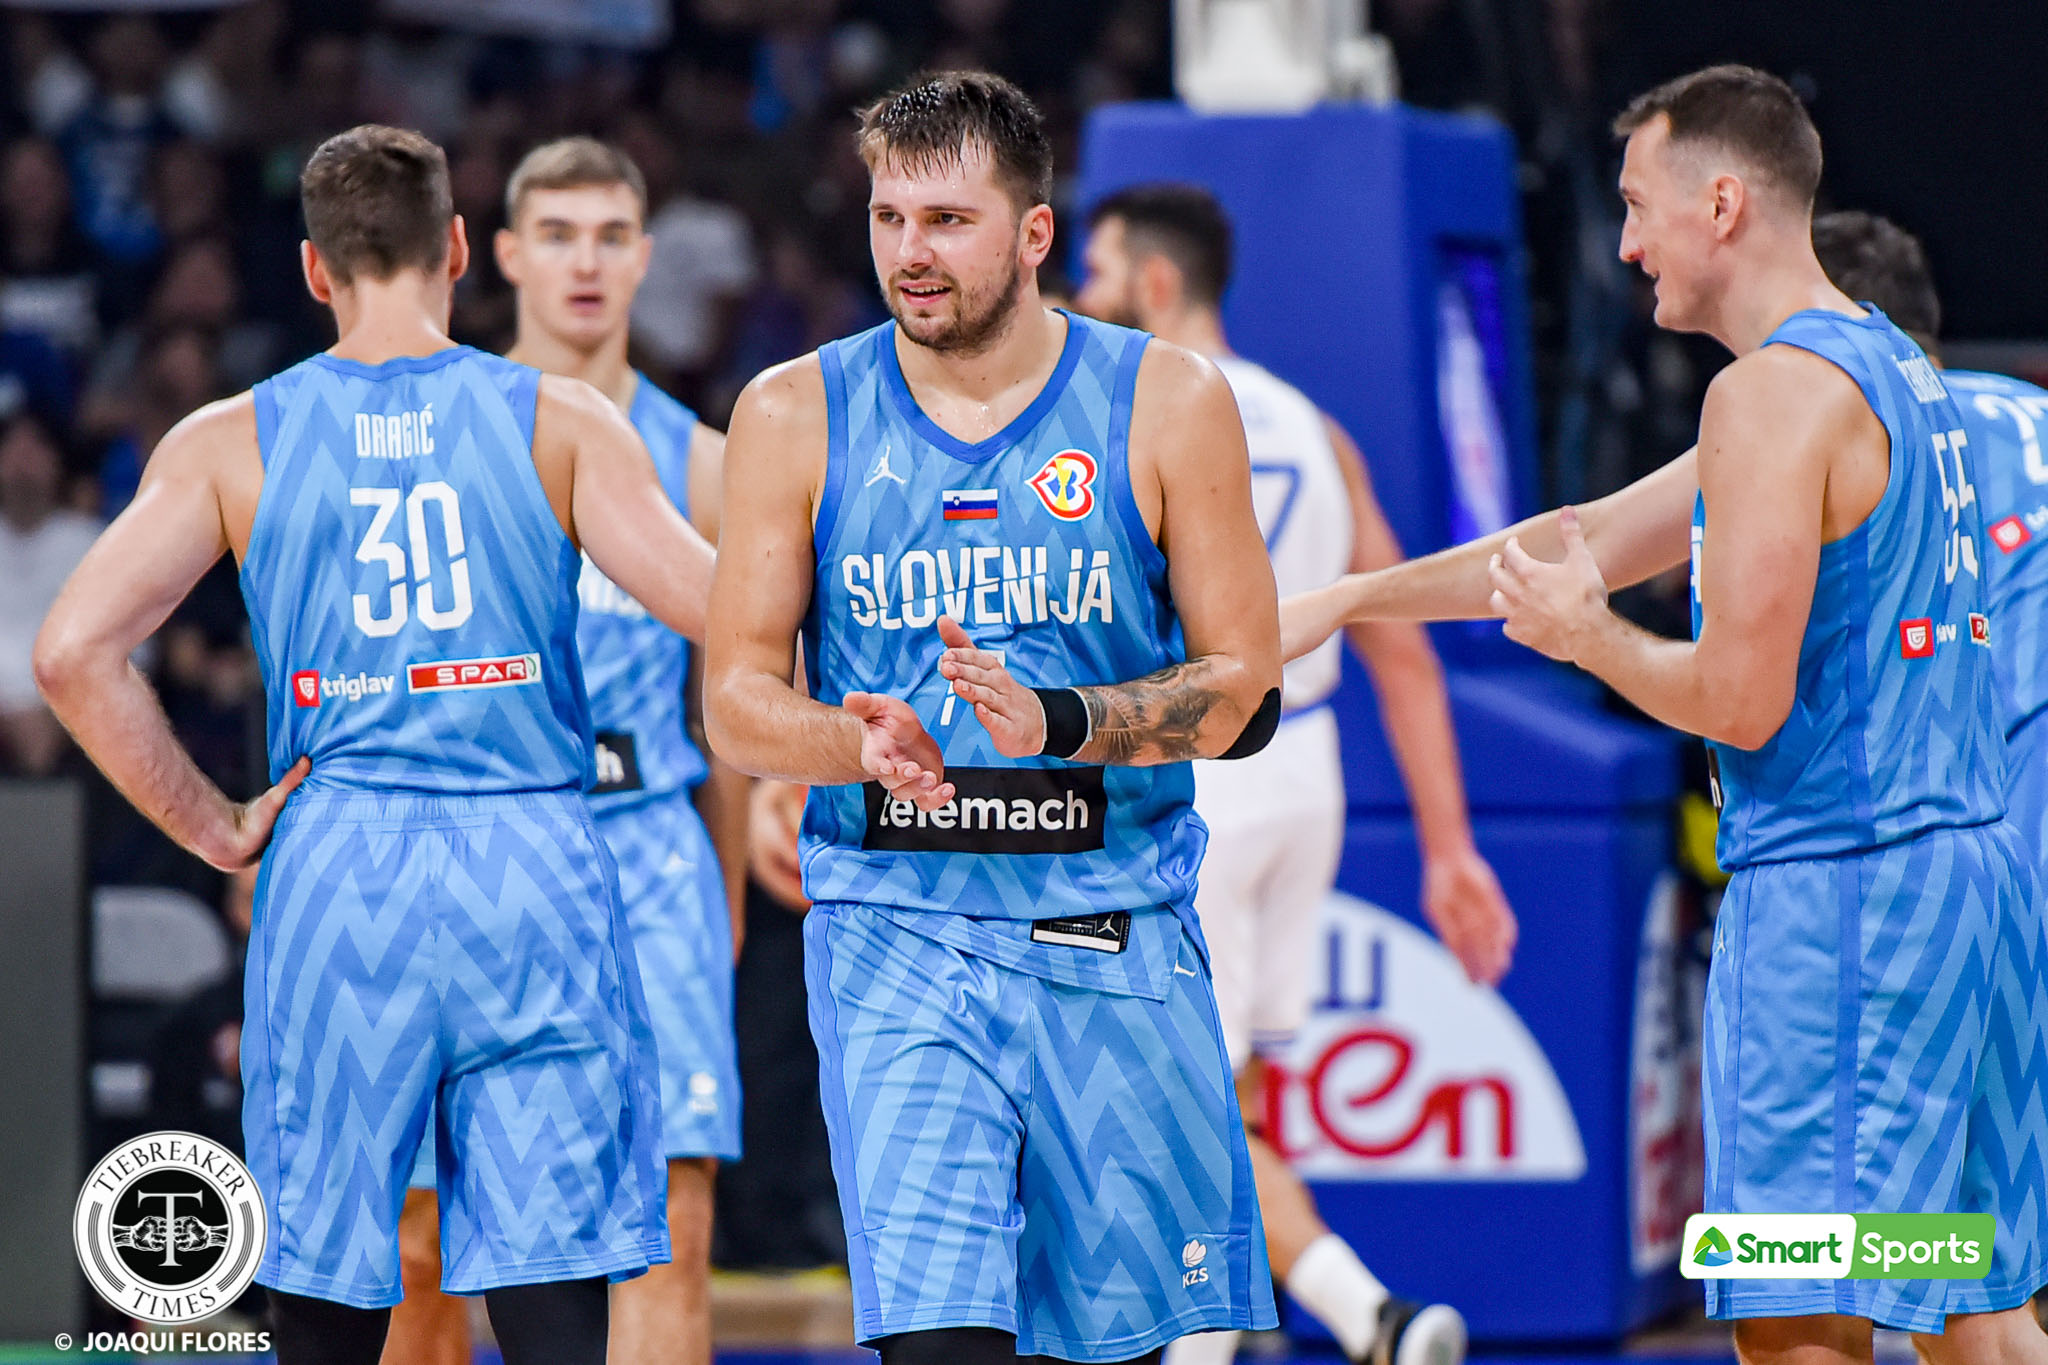 Coach thinks Luka Doncic got energy boost from Filipino fans